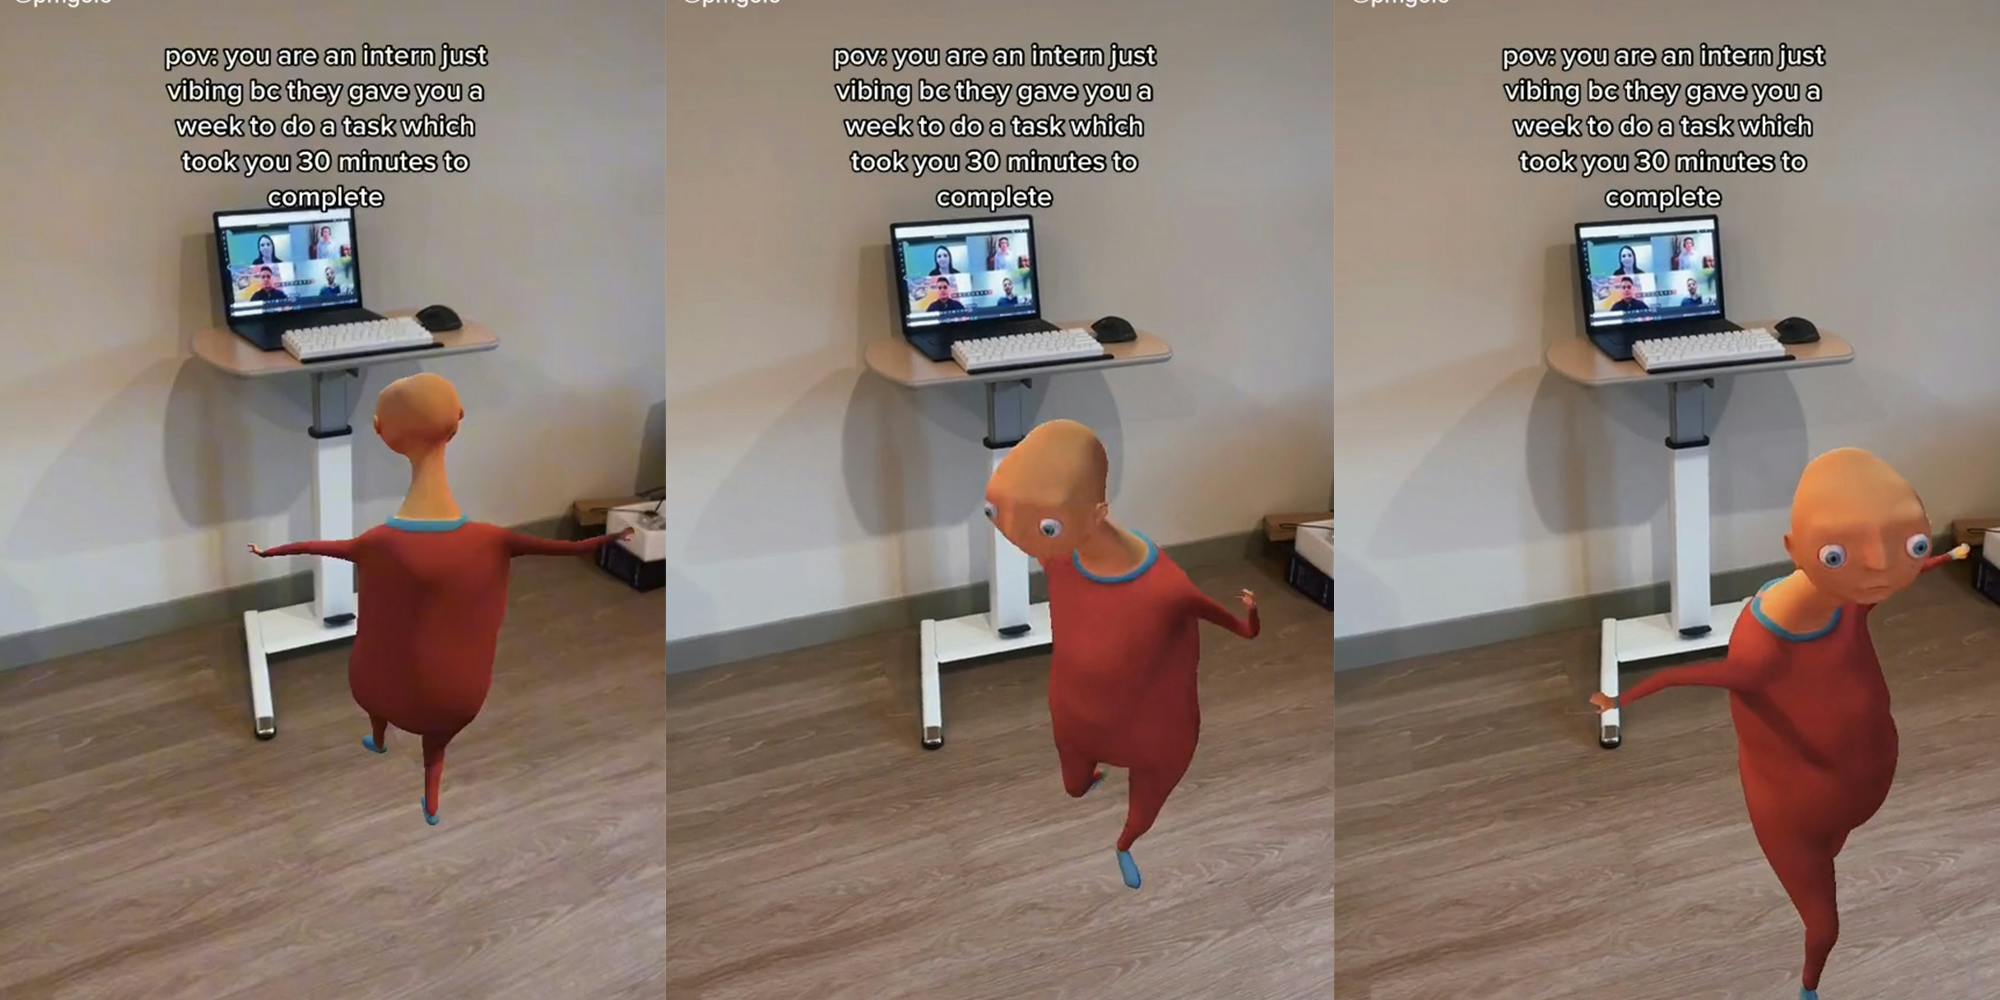 animated man dancing in front of computer workstation with caption "pov: you are an intern just vibing bc they gave you a wek to do a task which took you 30 minutes to complete"